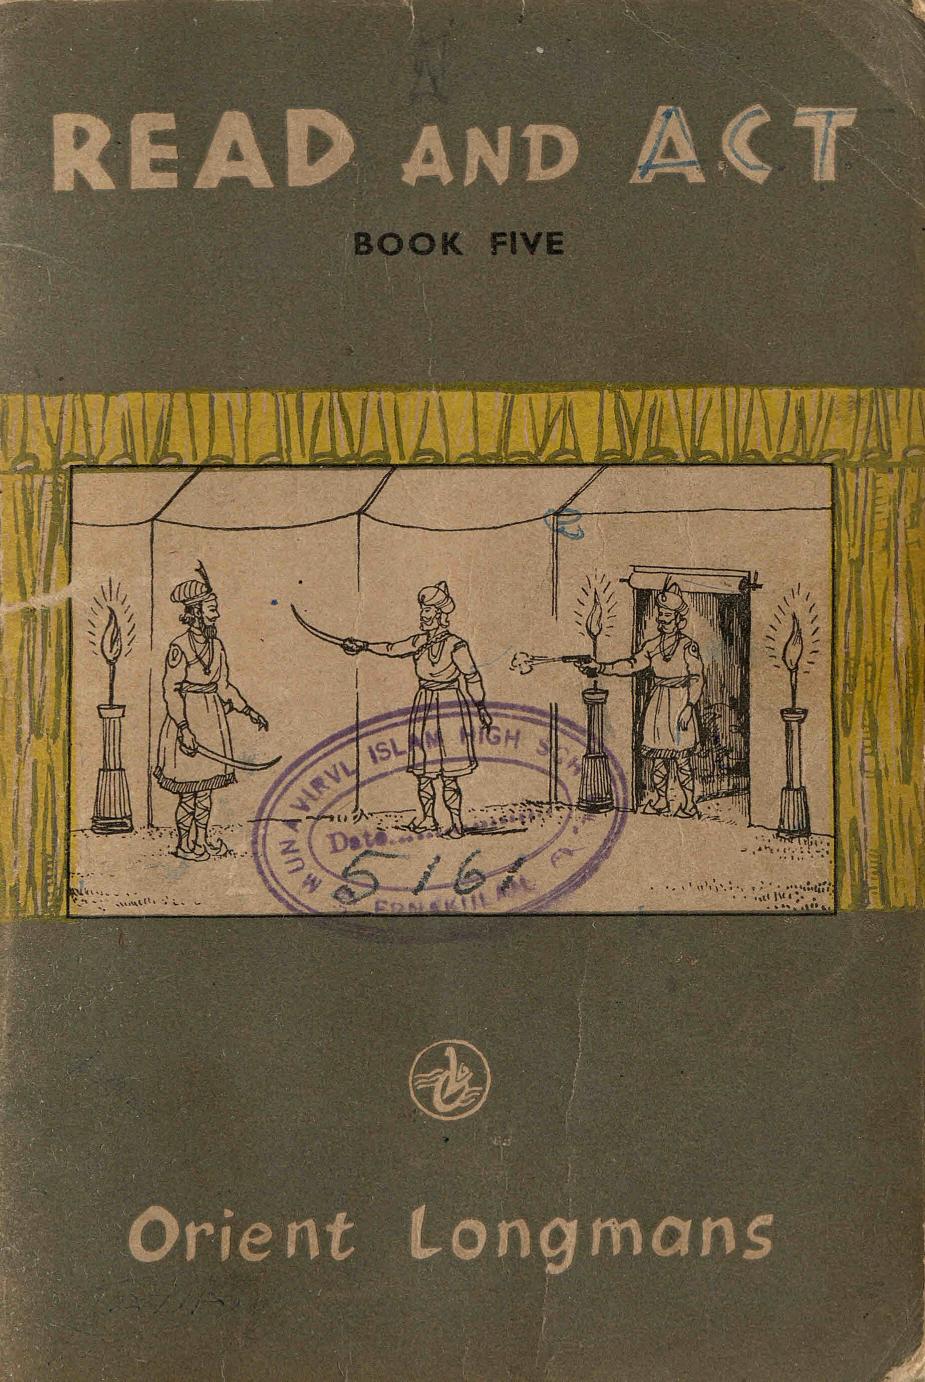  1963 - Read and Act - Book Five